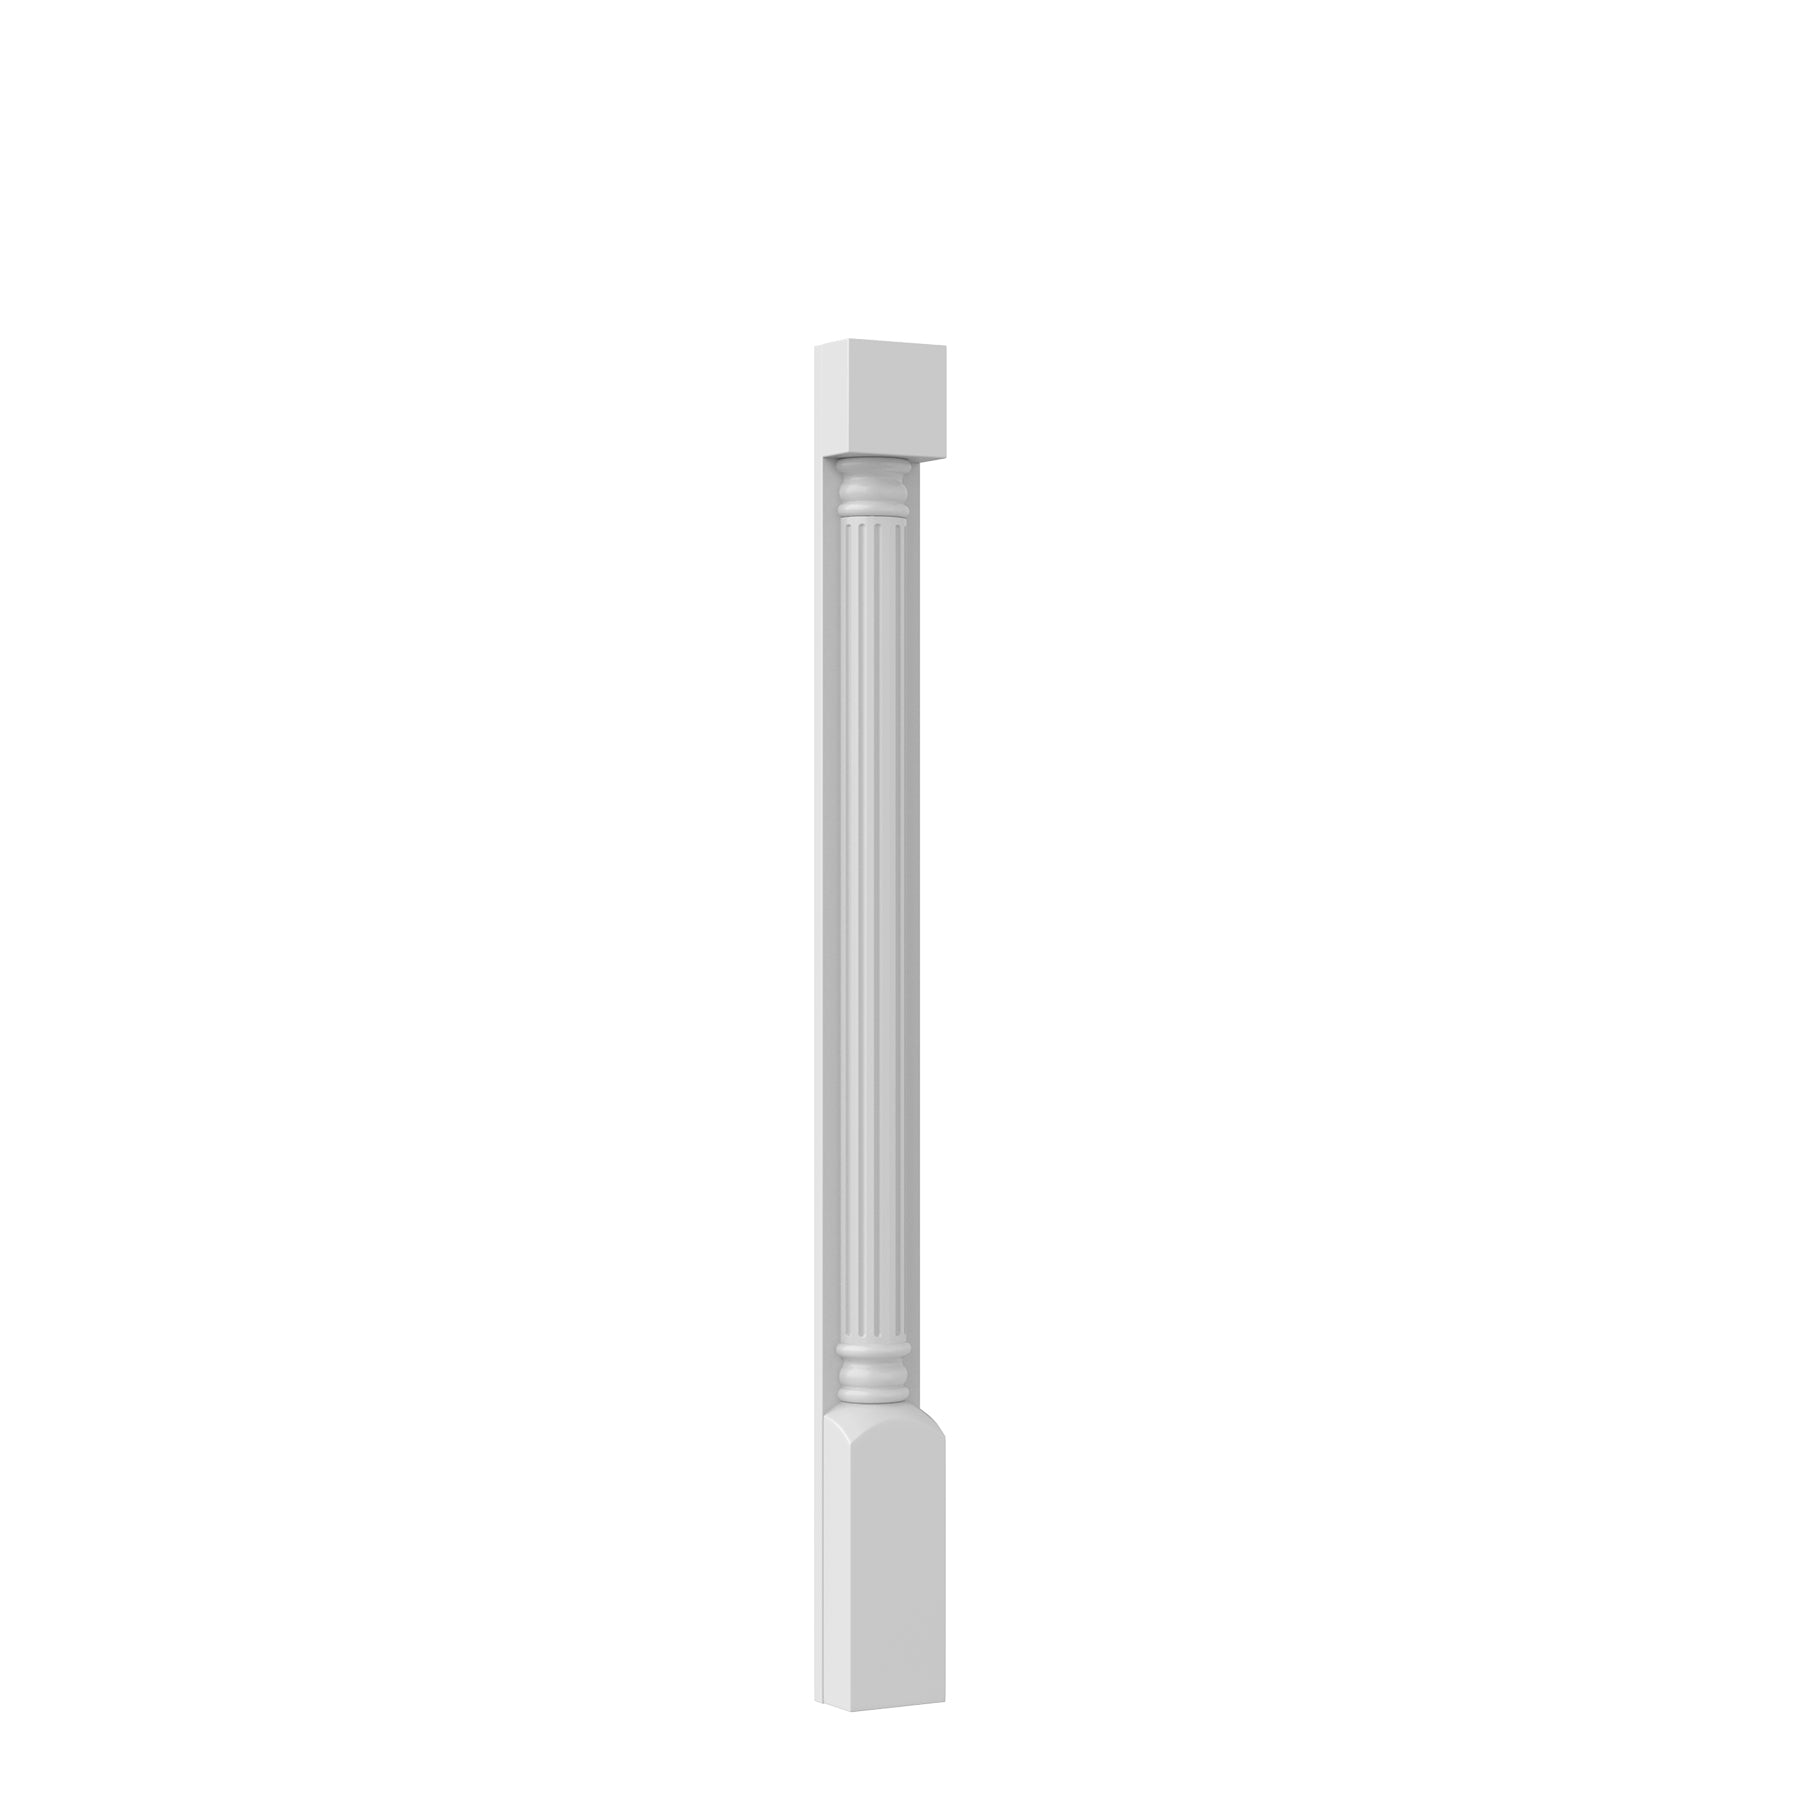 Elegant White - Spindle - Fluted | 2.5"W x 30"H x 0.5"D